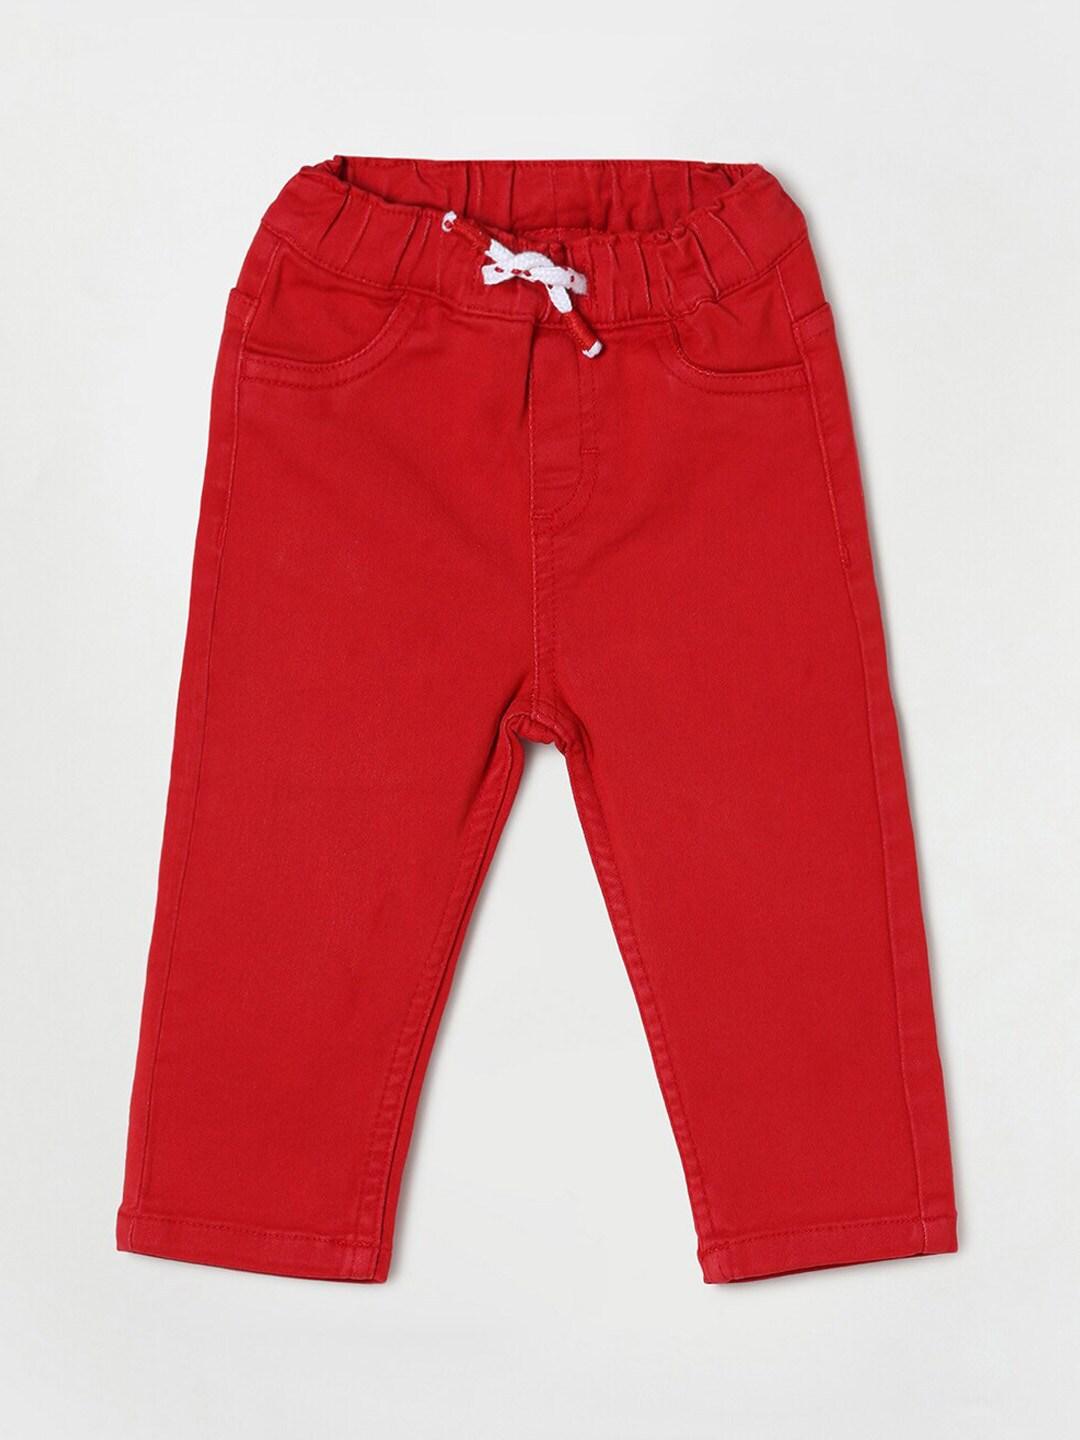 Juniors by Lifestyle Boys Red Solid Cotton Track Pants